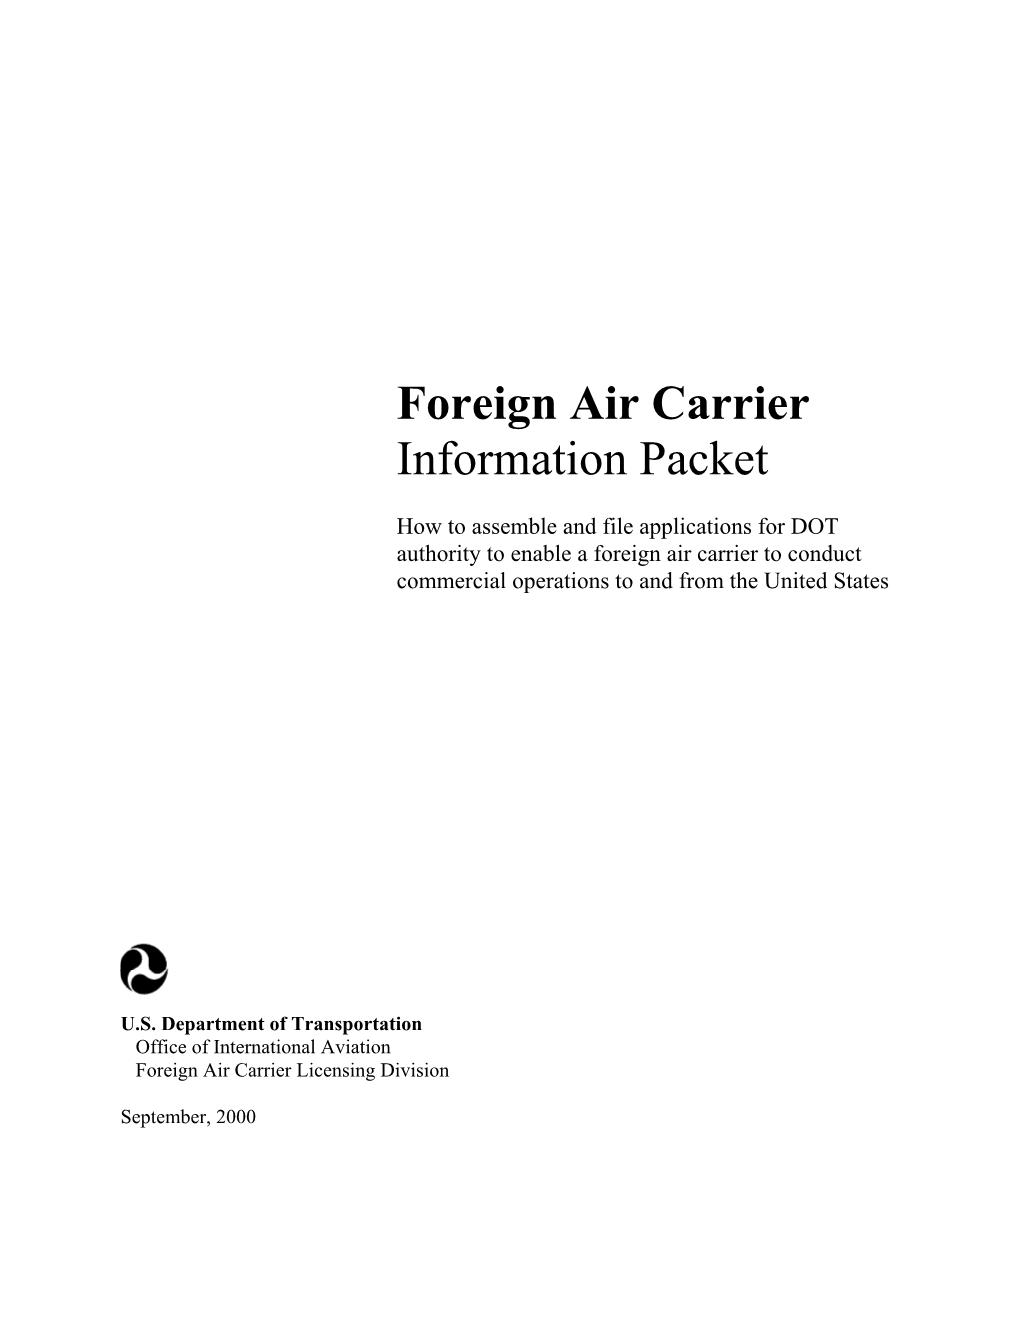 Foreign Air Carrier Information Packet